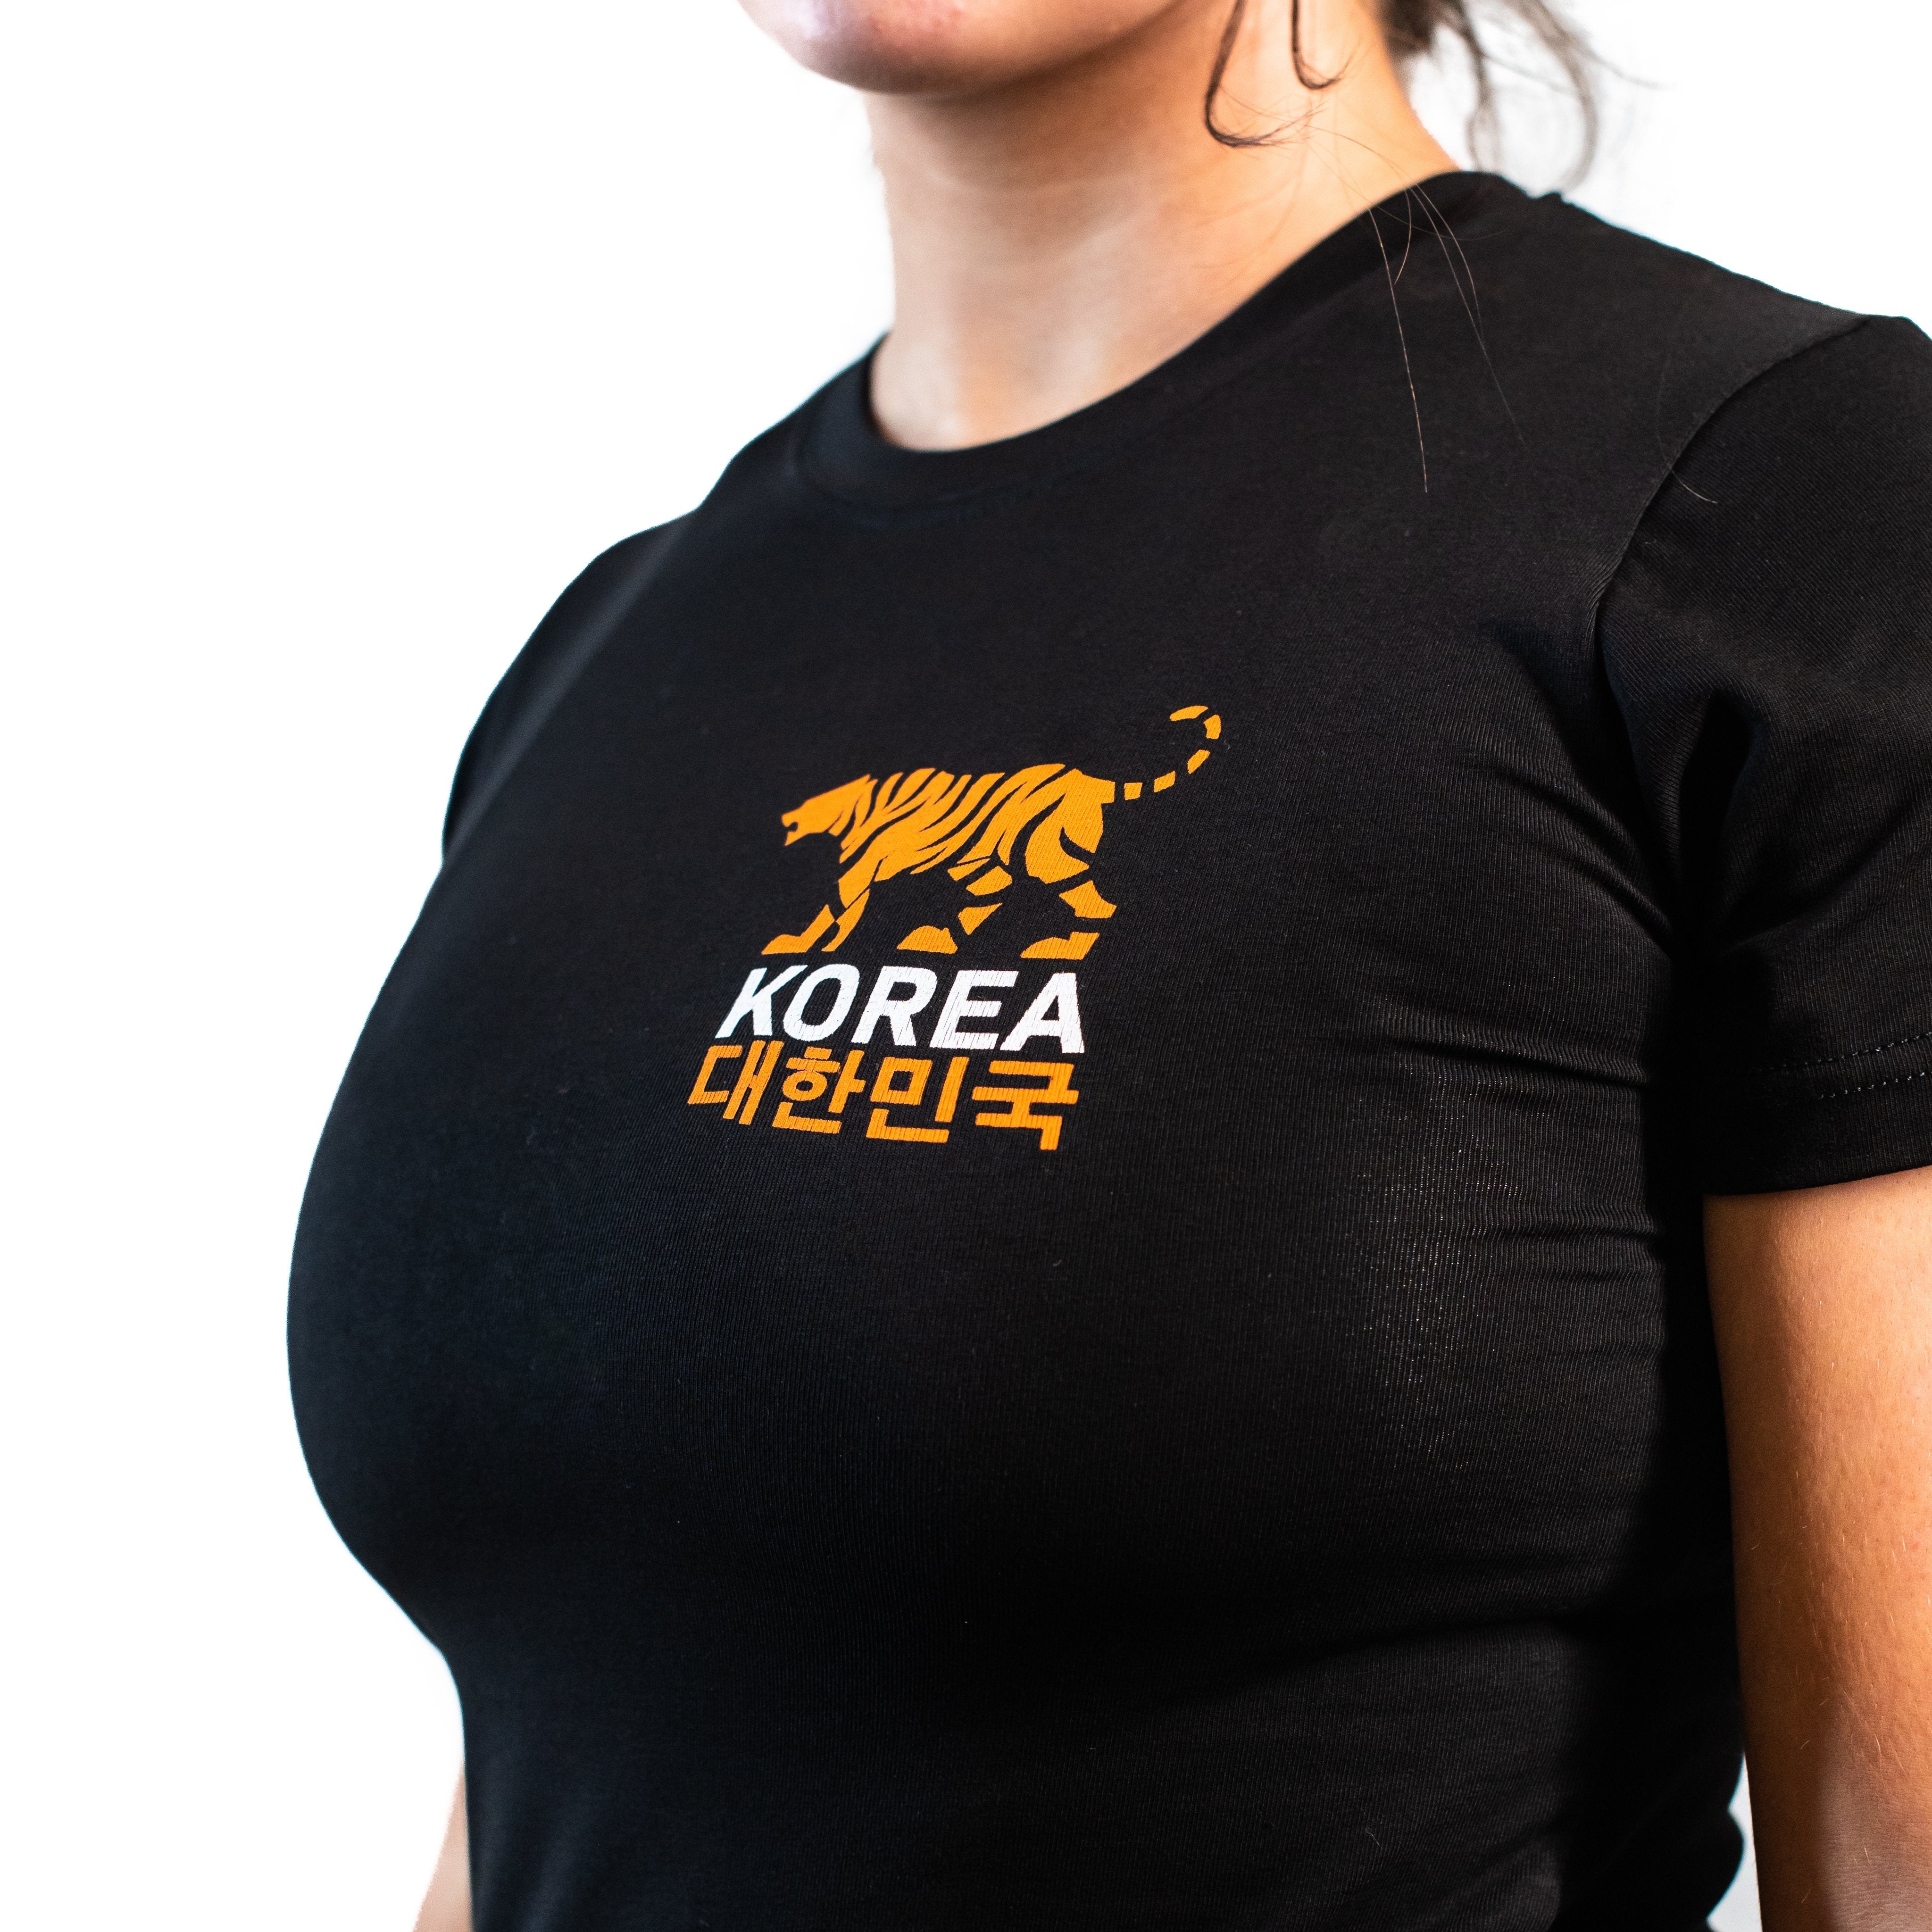 Korea Bar Grip T-shirt, great as a squat shirt. Purchase Korea Bar Grip tshirt UK from A7 UK or A7 Europe. No more chalk and no more sliding. Best Bar Grip Tshirts, shipping to UK and Europe from A7 UK or A7 Europe. The best Powerlifting apparel for all your workouts. Available in UK and Europe including France, Italy, Germany, Sweden and Poland